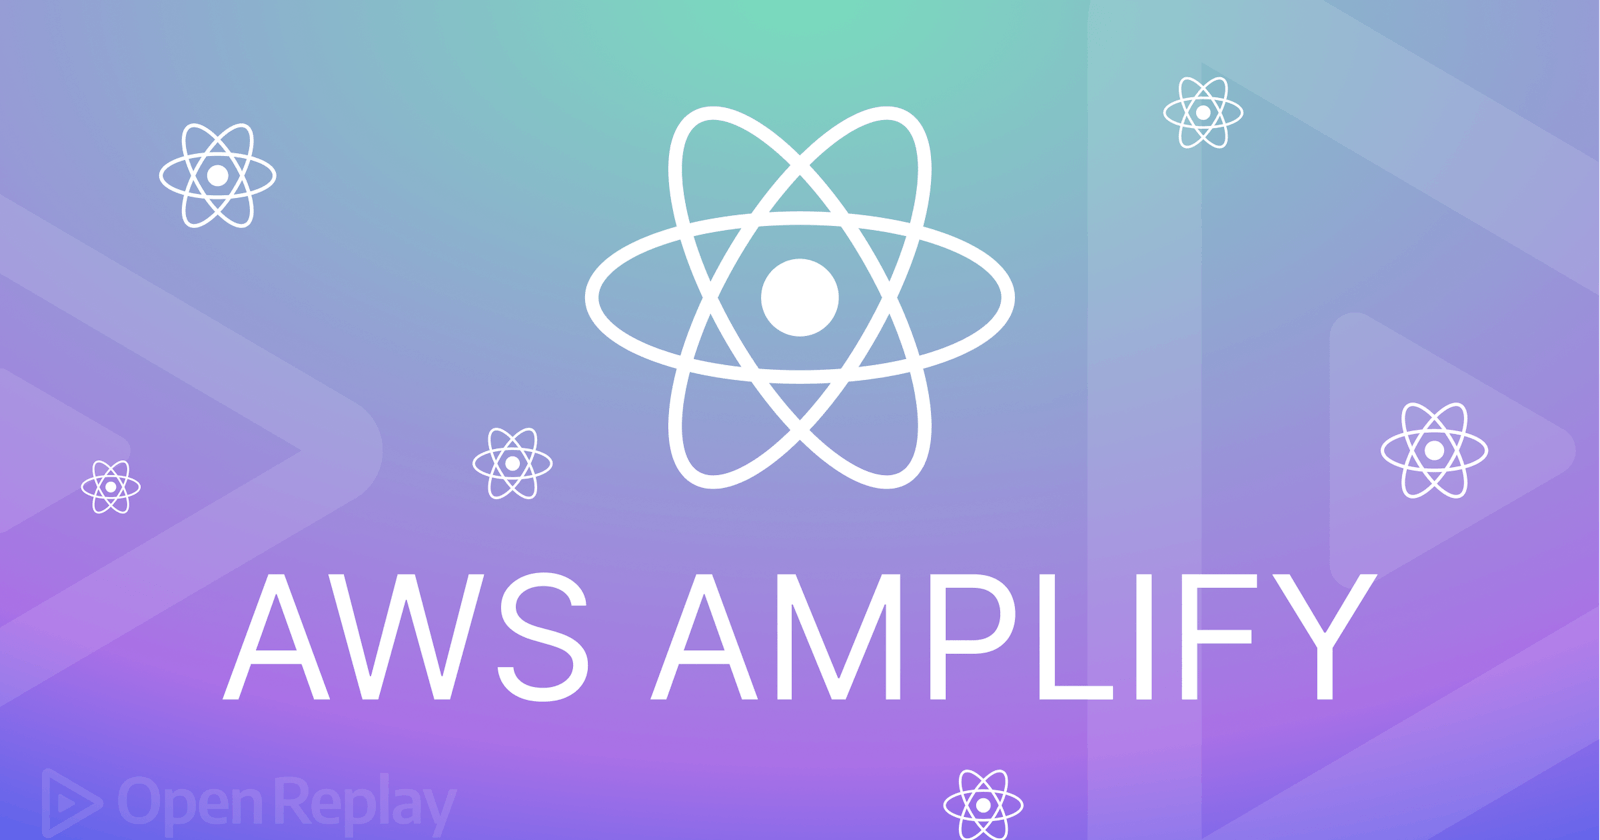 Step-by-step guide on how to build and deploy a Serverless React application using AWS Amplify.